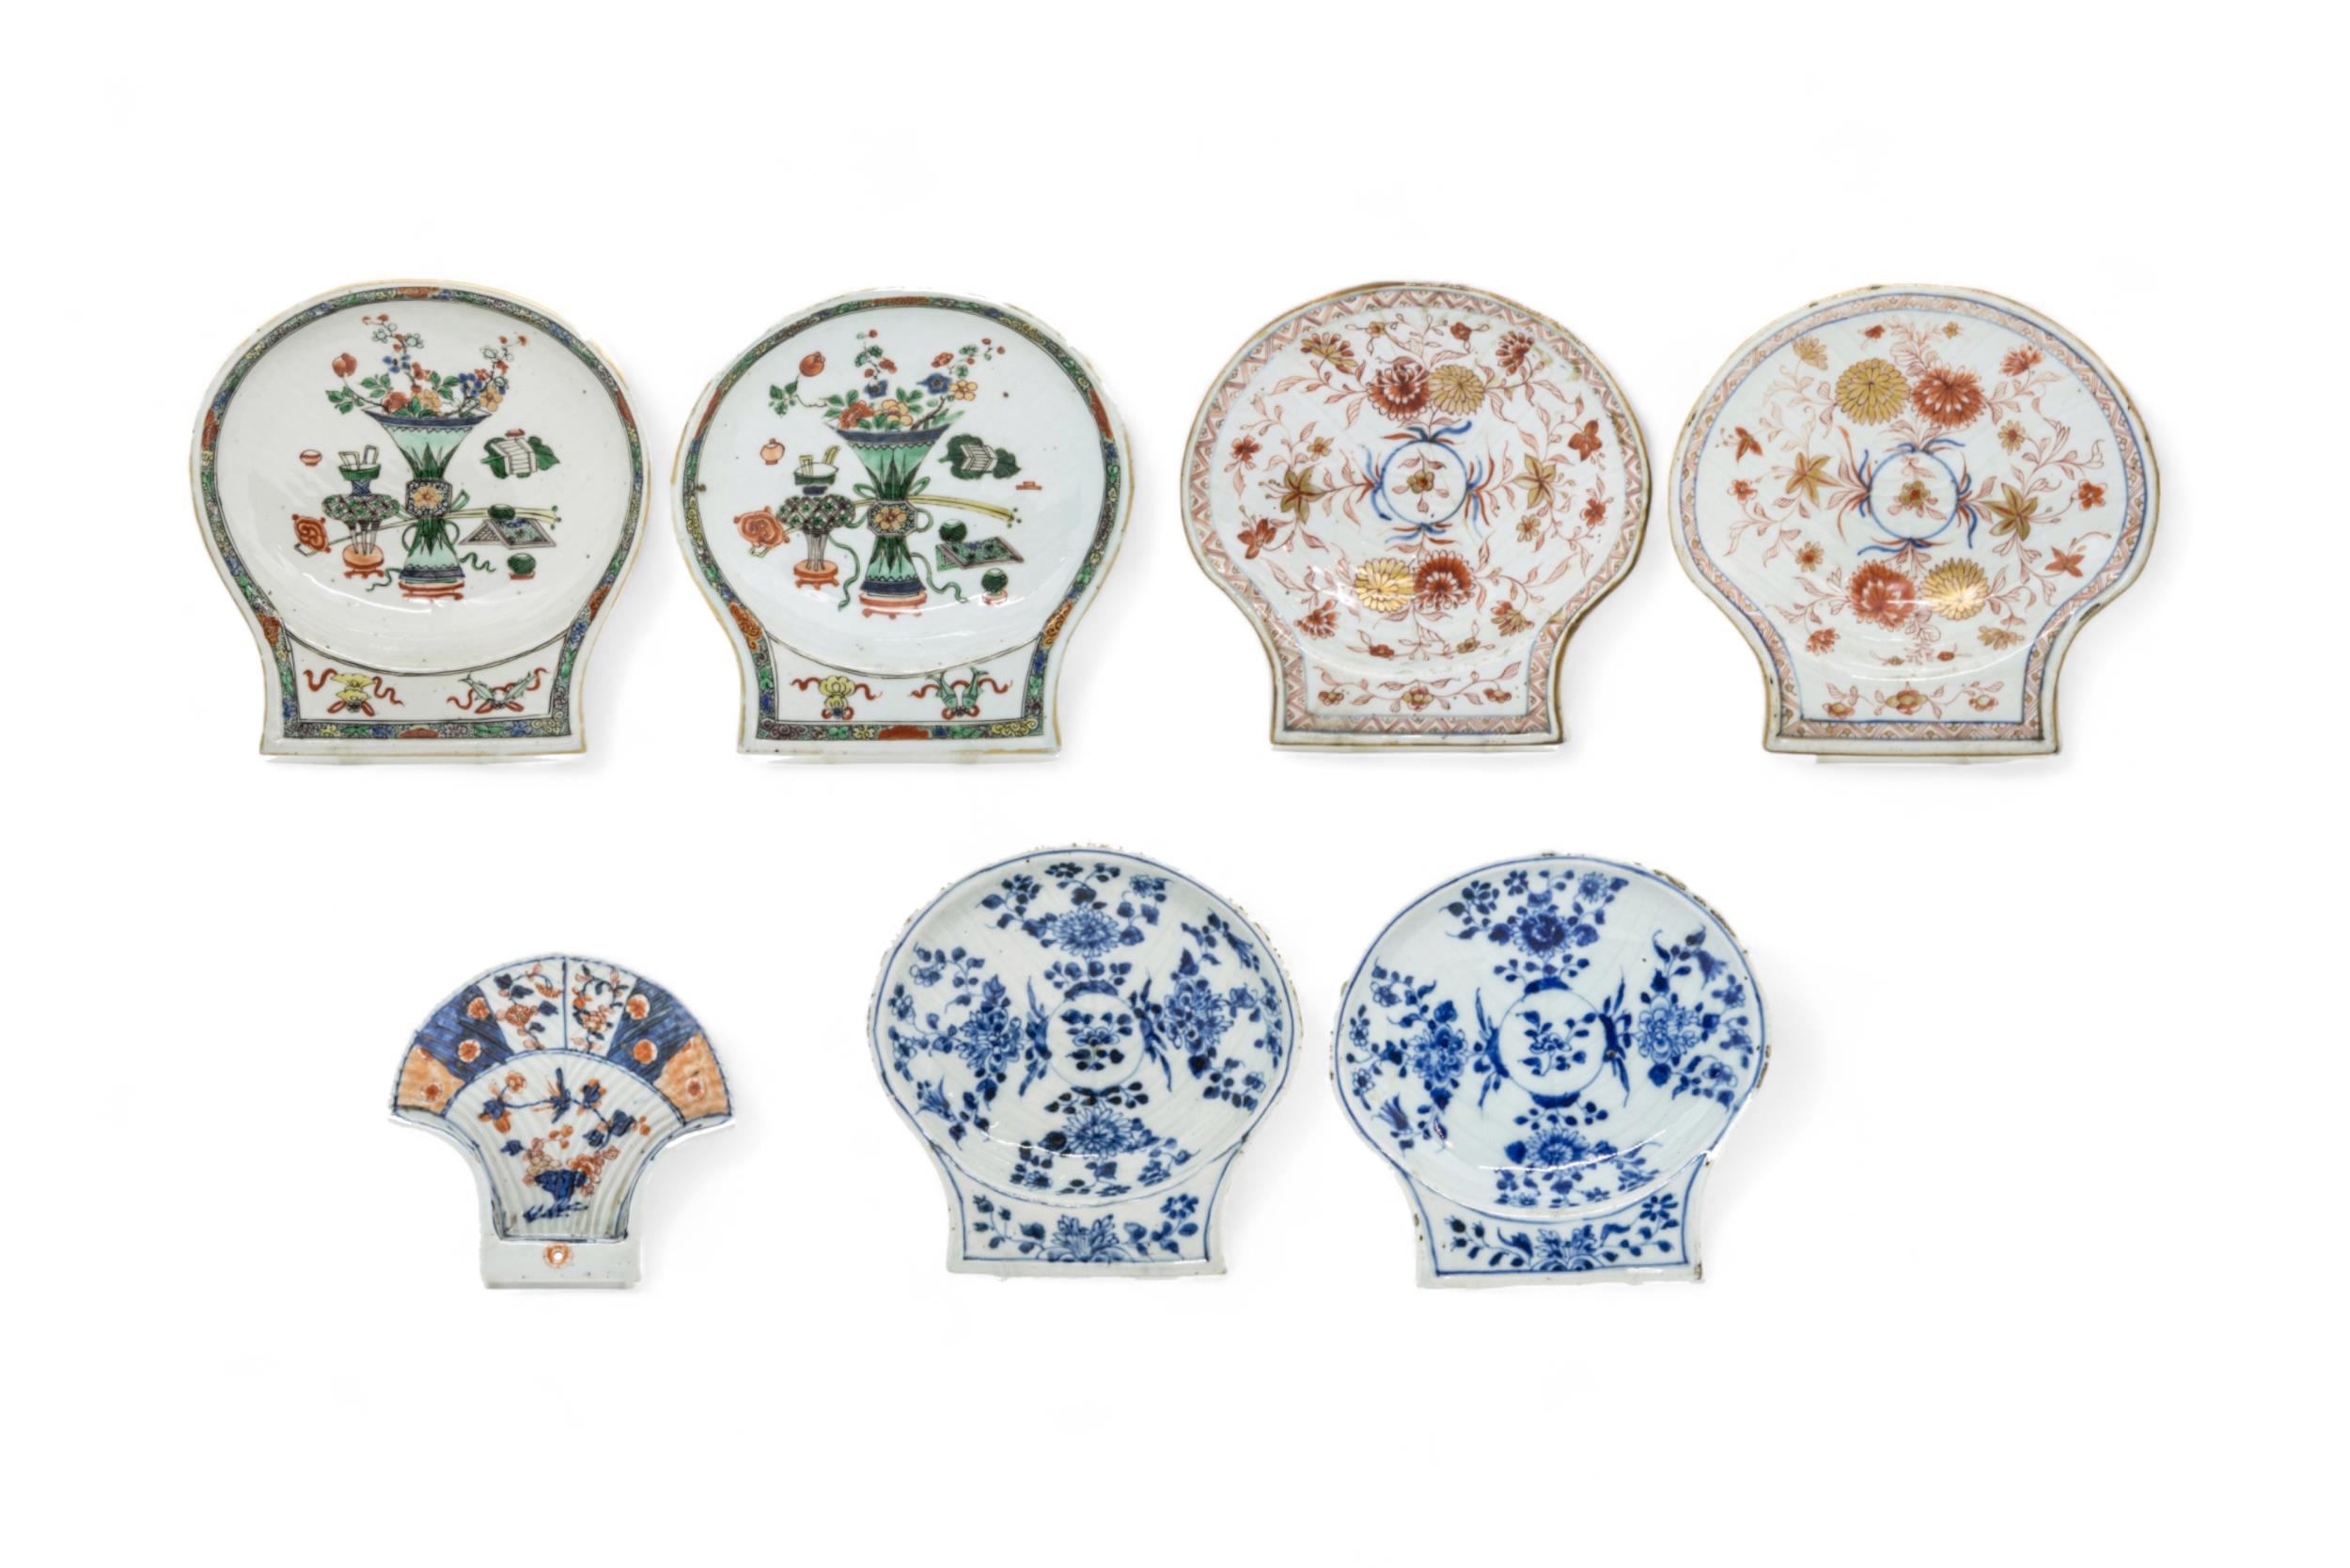 THREE PAIRS OF CHINESE EXPORT SHELL-FORM DISHES QING DYNASTY, 18TH CENTURY together with a single